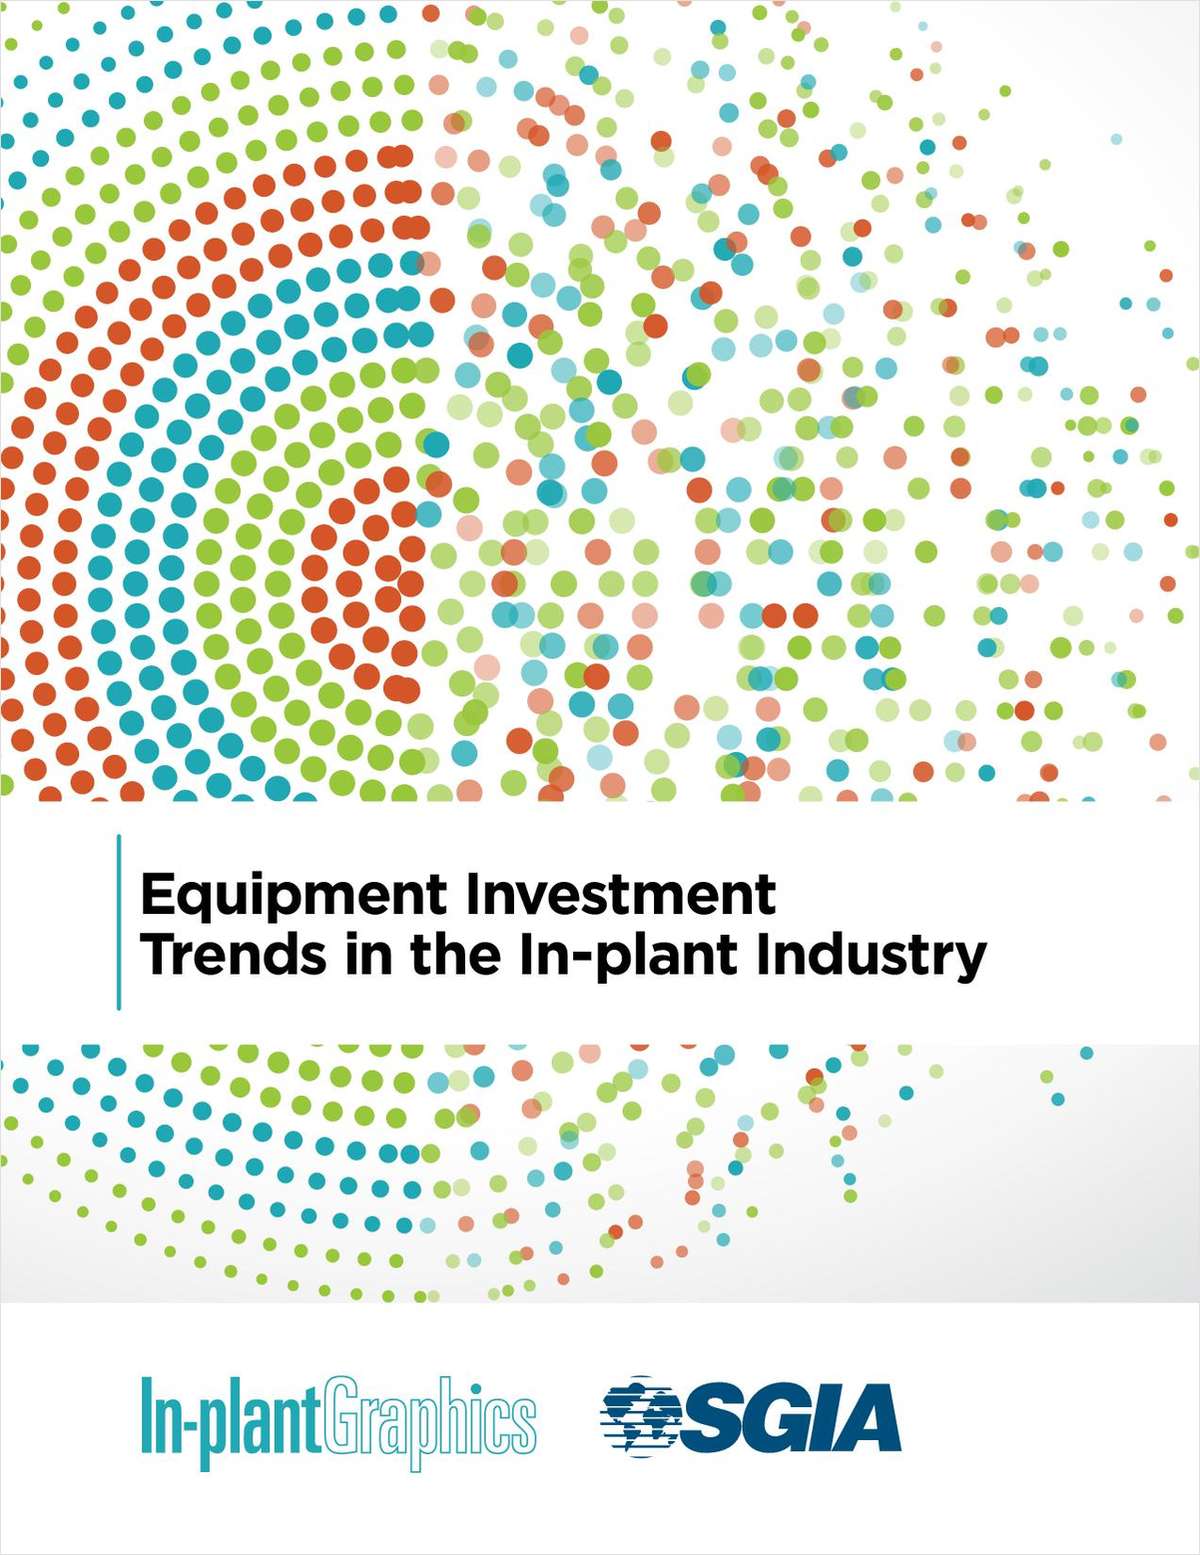 Equipment Investment Trends in the In-plant Industry